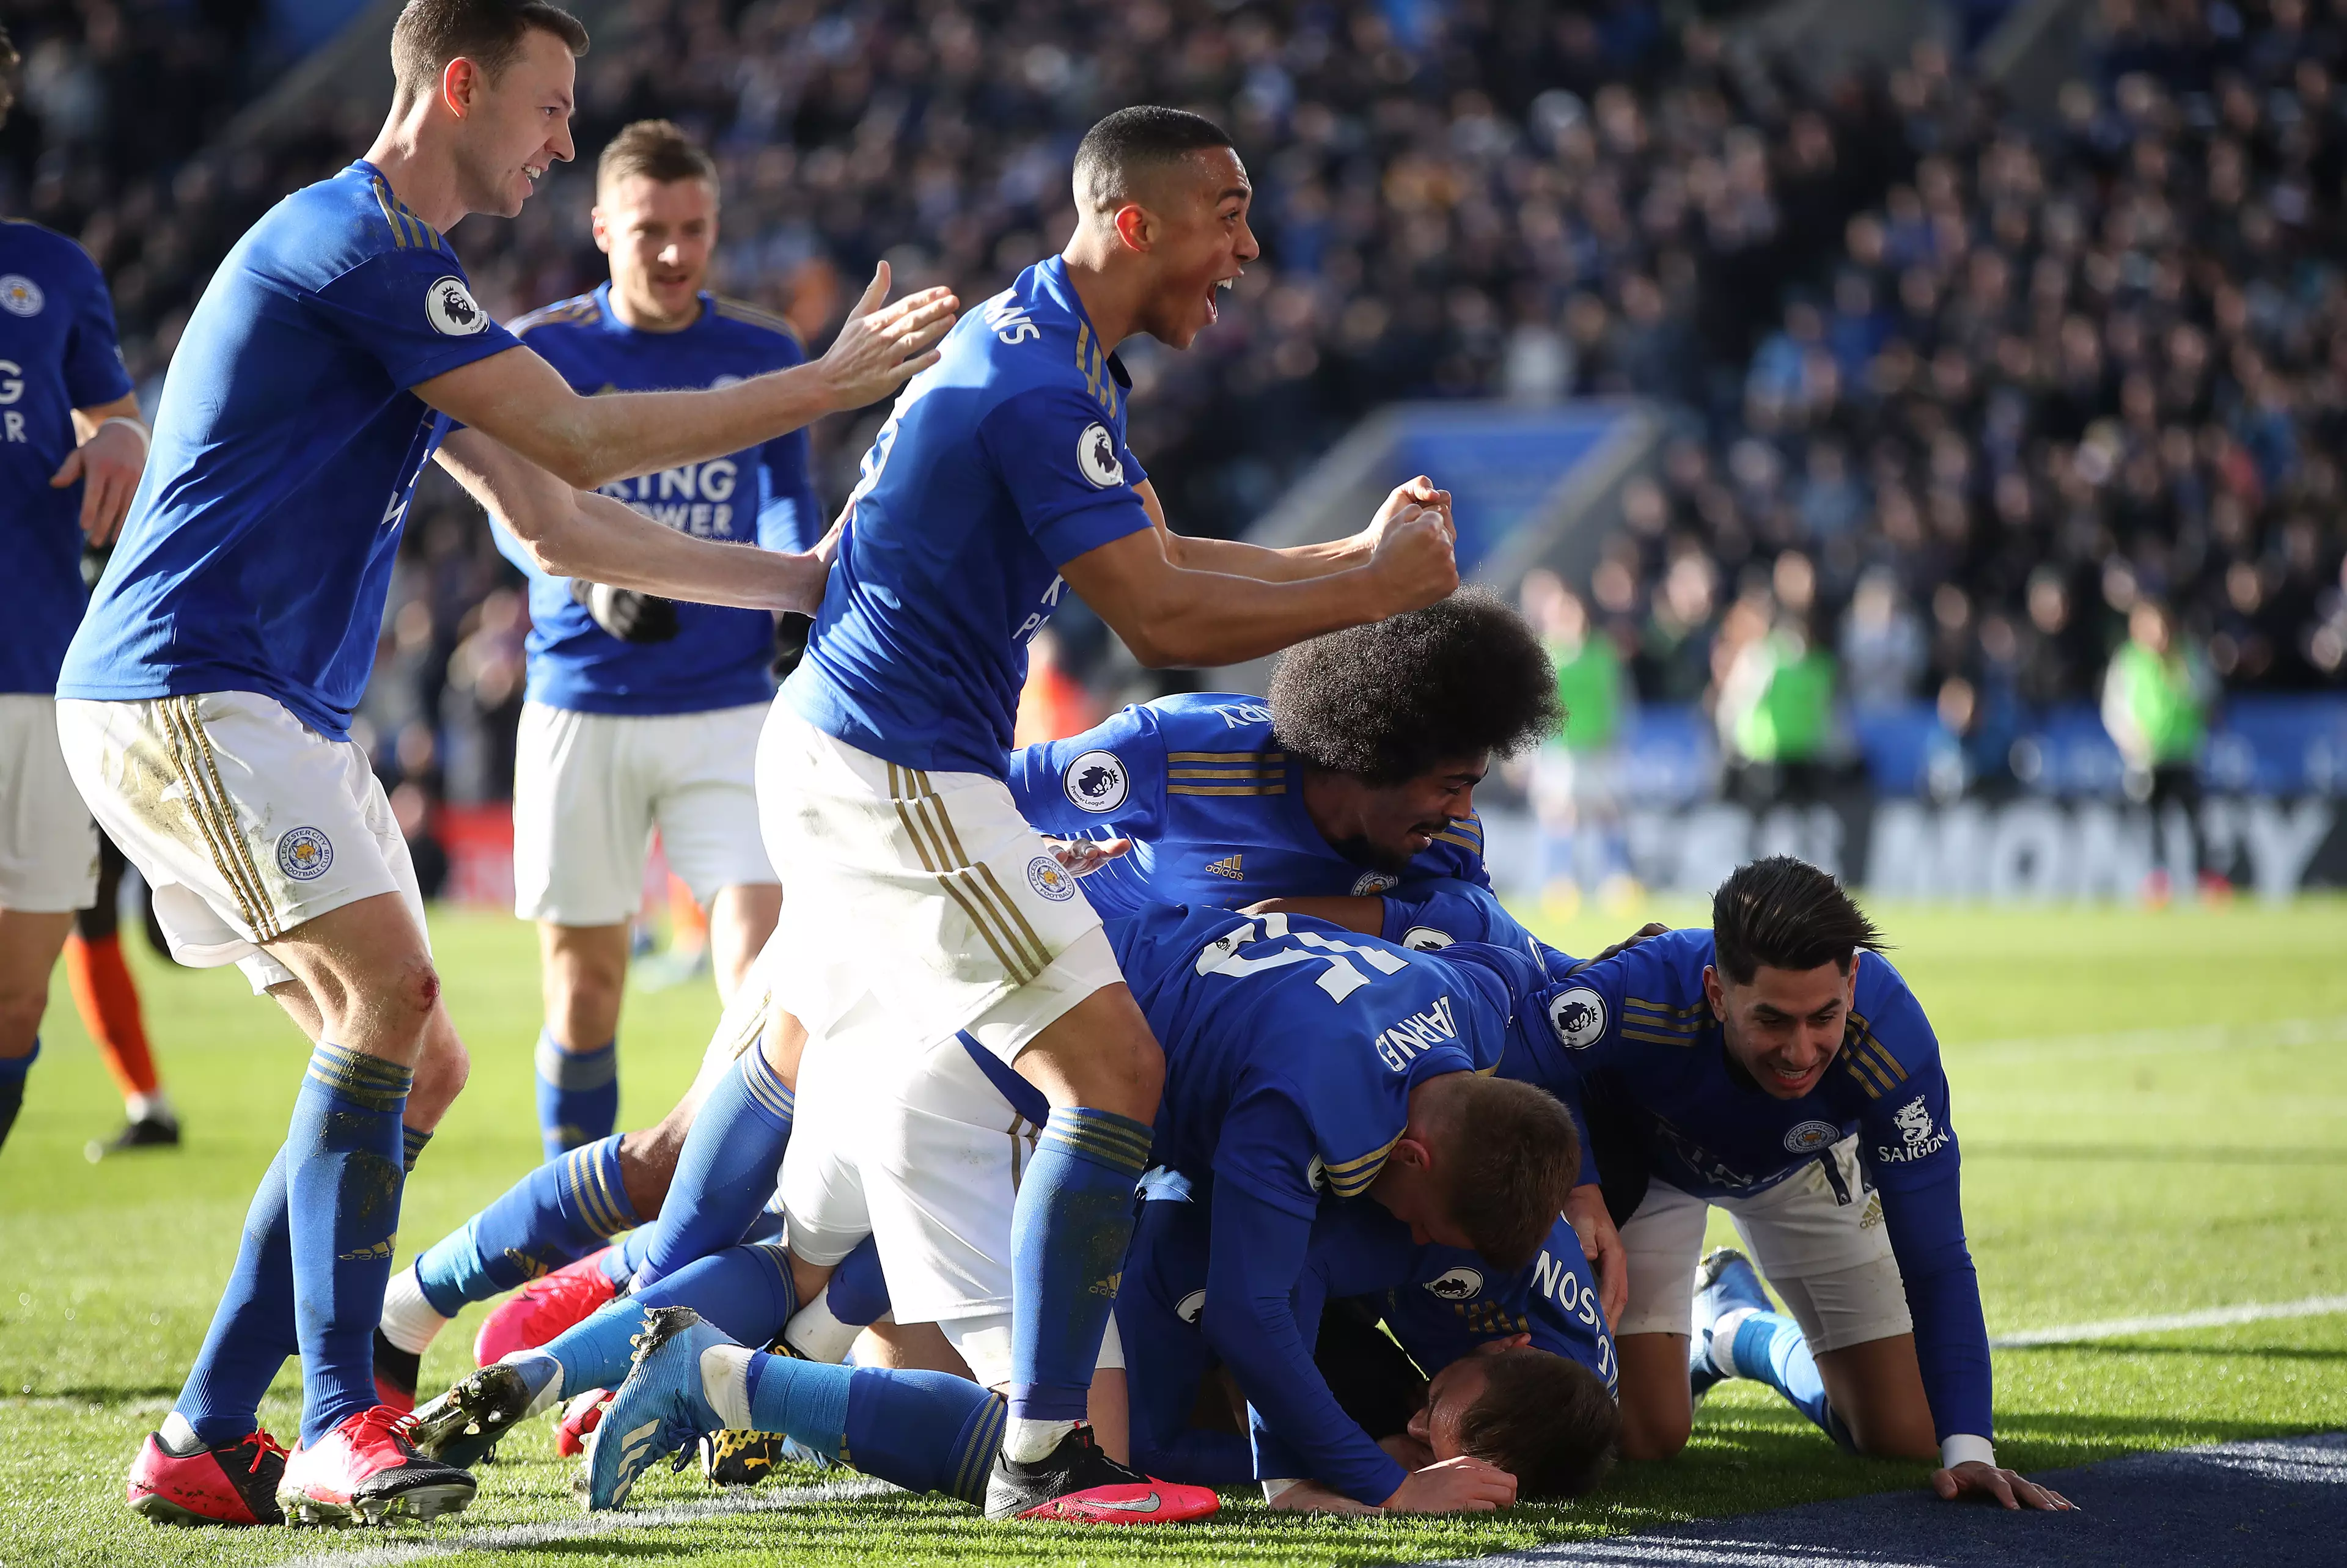 Leicester look certain to get into the Champions League next season. Image: PA Images